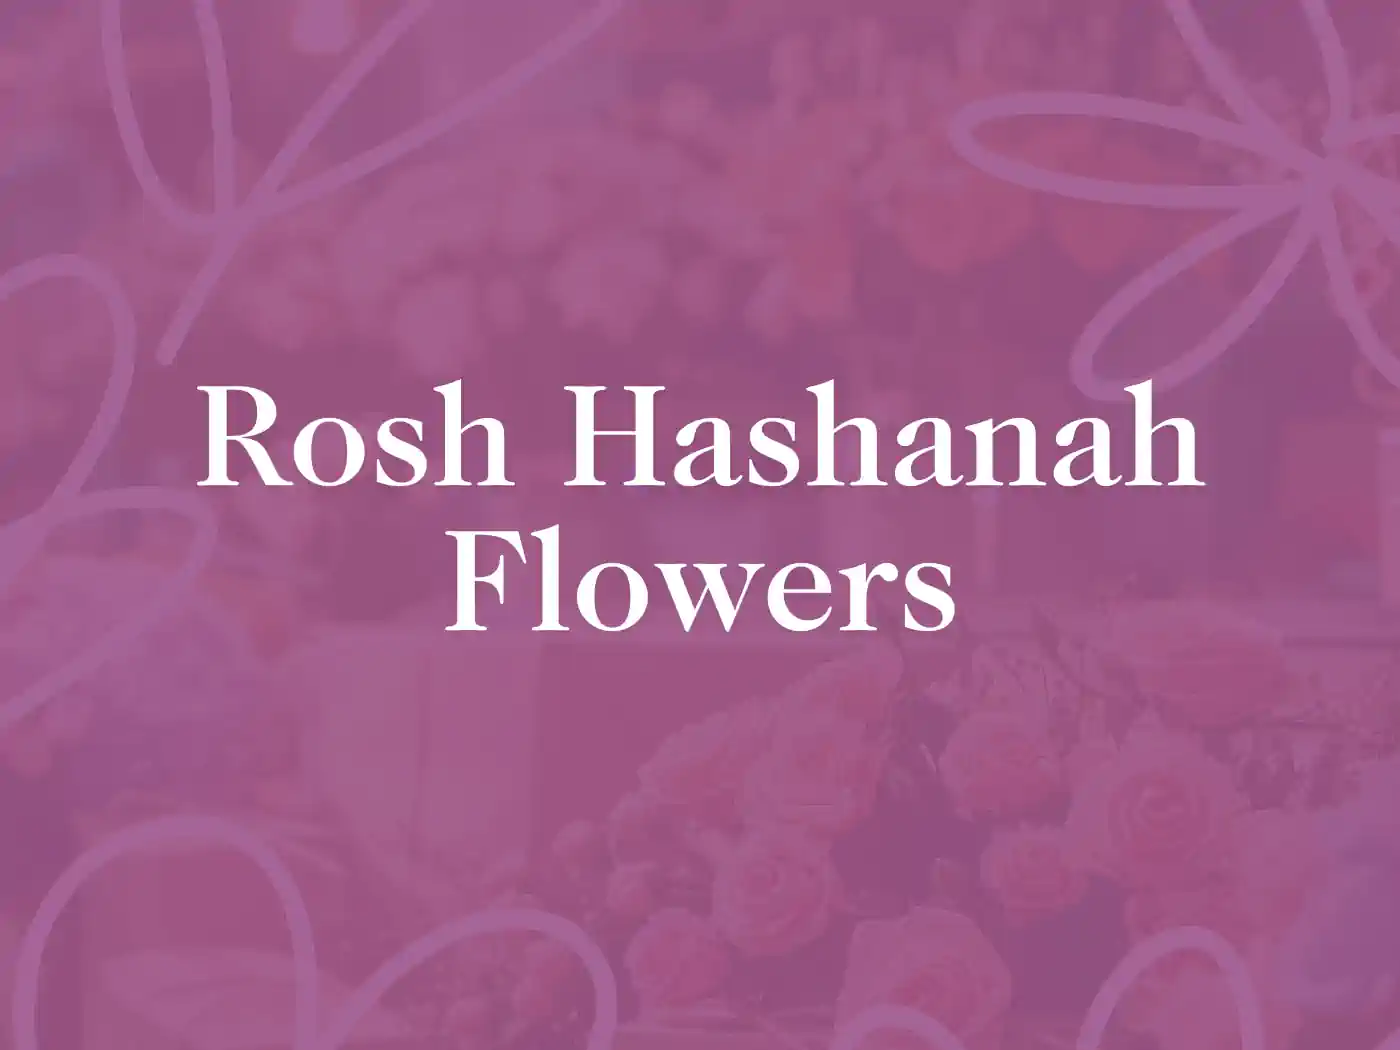 Text on a purple background stating "Rosh Hashanah Flowers" - Fabulous Flowers and Gifts, Rosh Hashanah Flowers Collection.